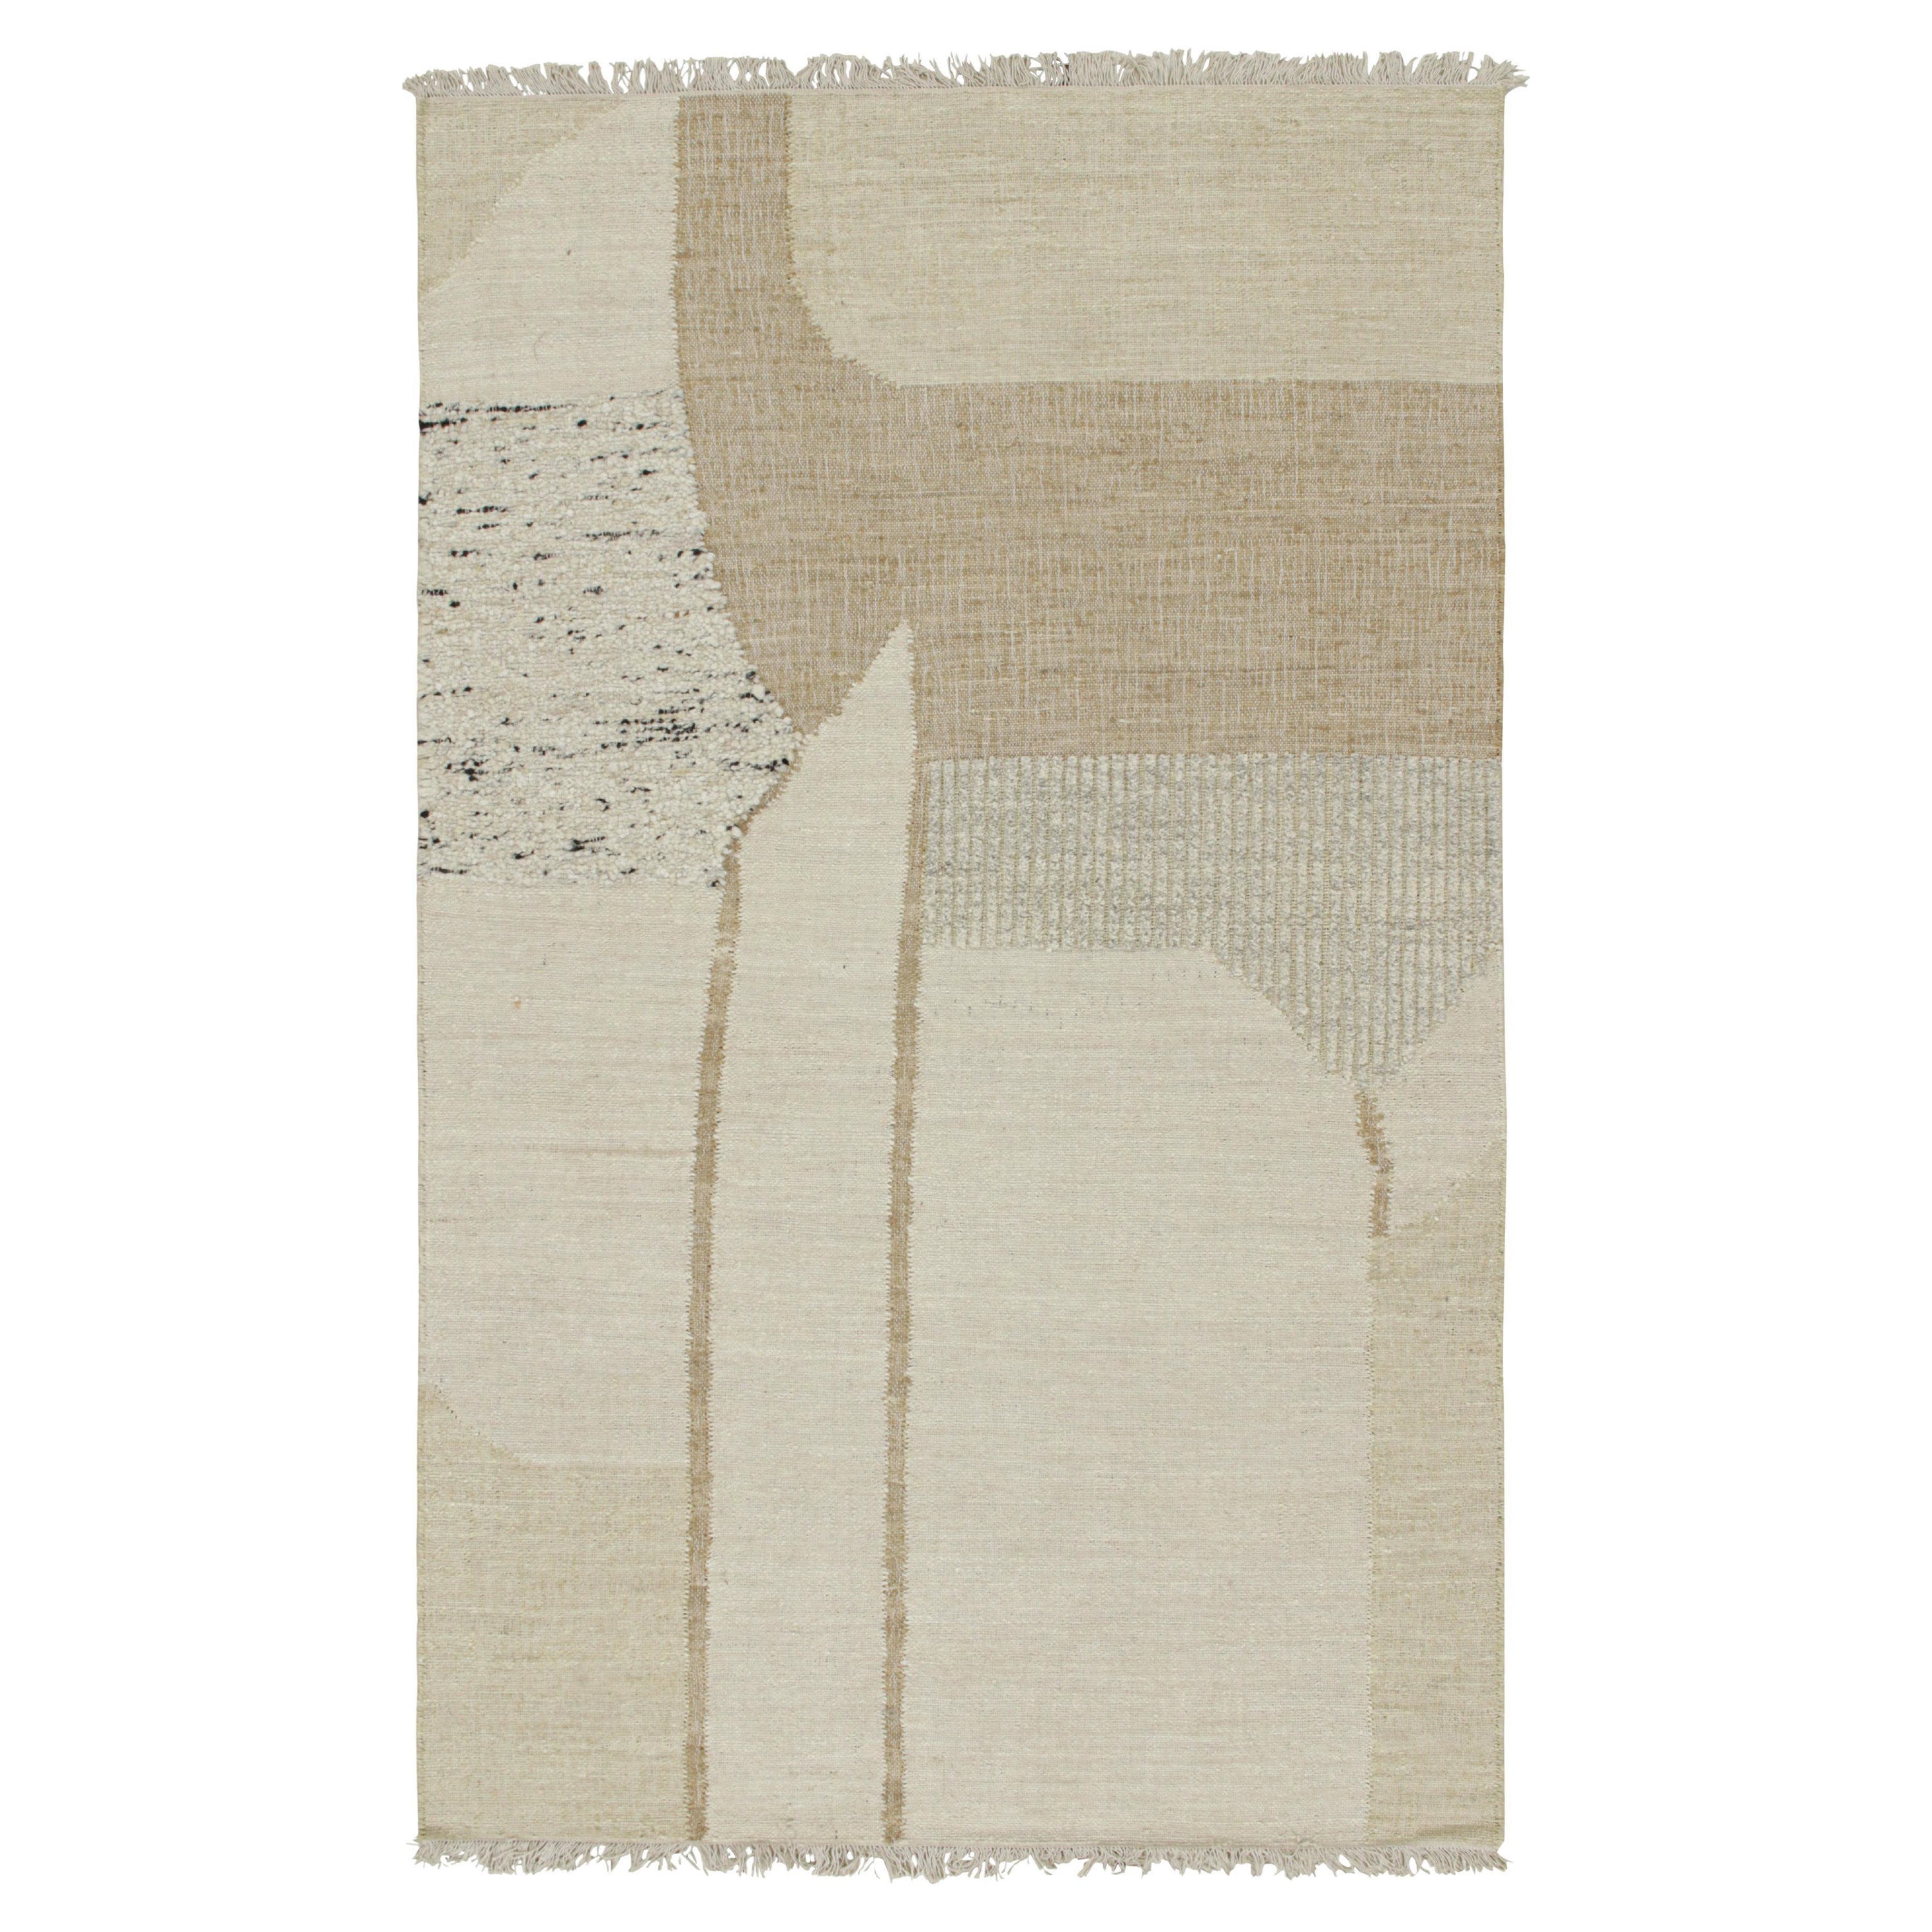 Reug & Kilim’s Contemporary kilim rug in Brown, White & Black Abstract Pattern For Sale